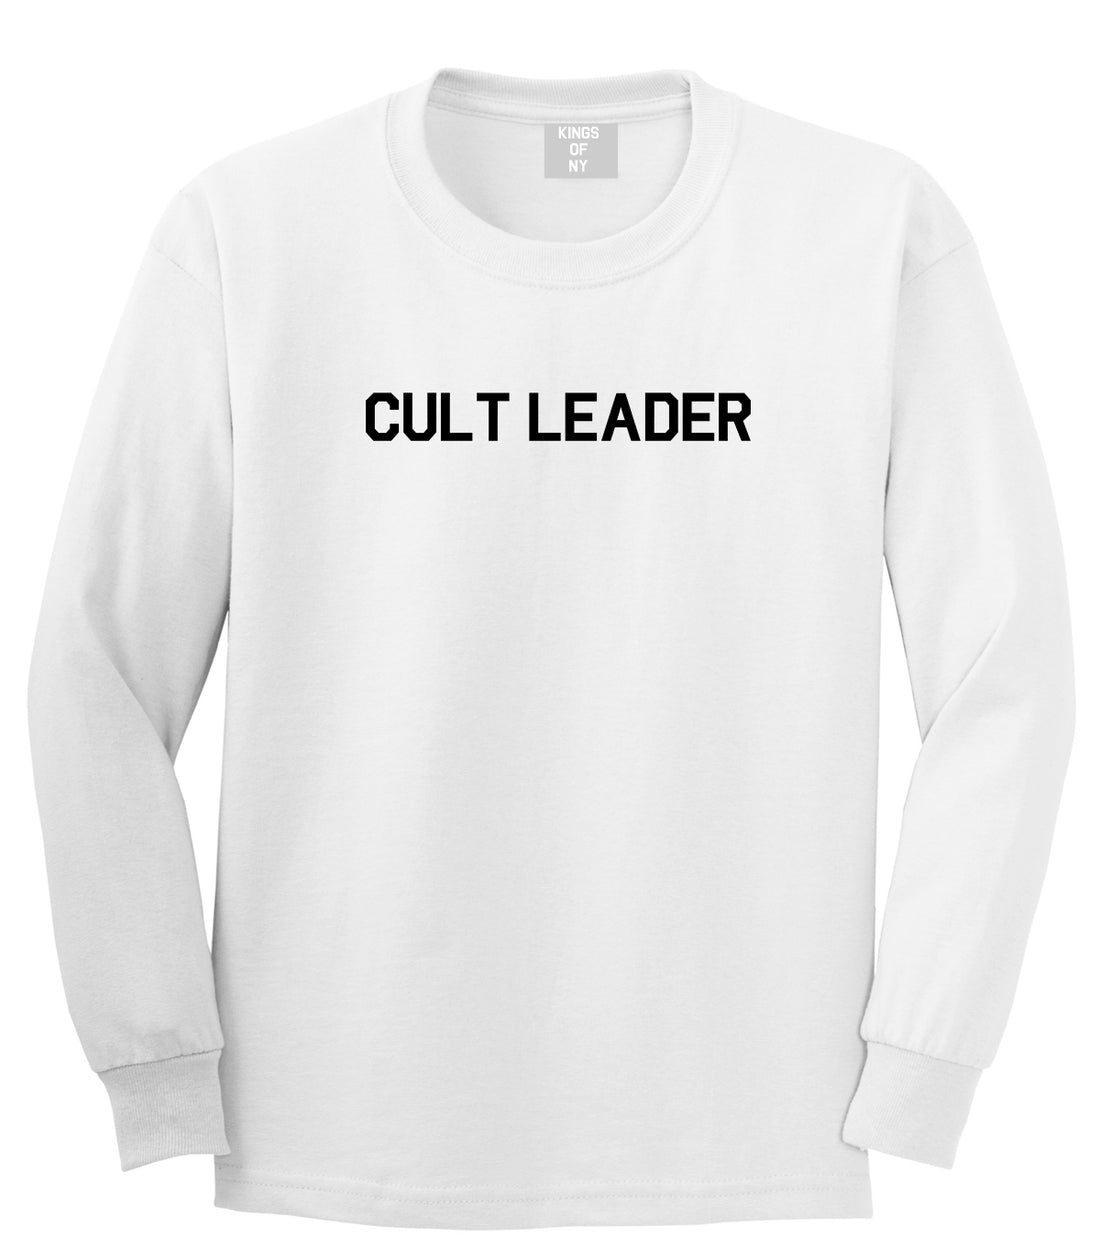 Cult Leader Costume Mens Long Sleeve T-Shirt White by Kings Of NY